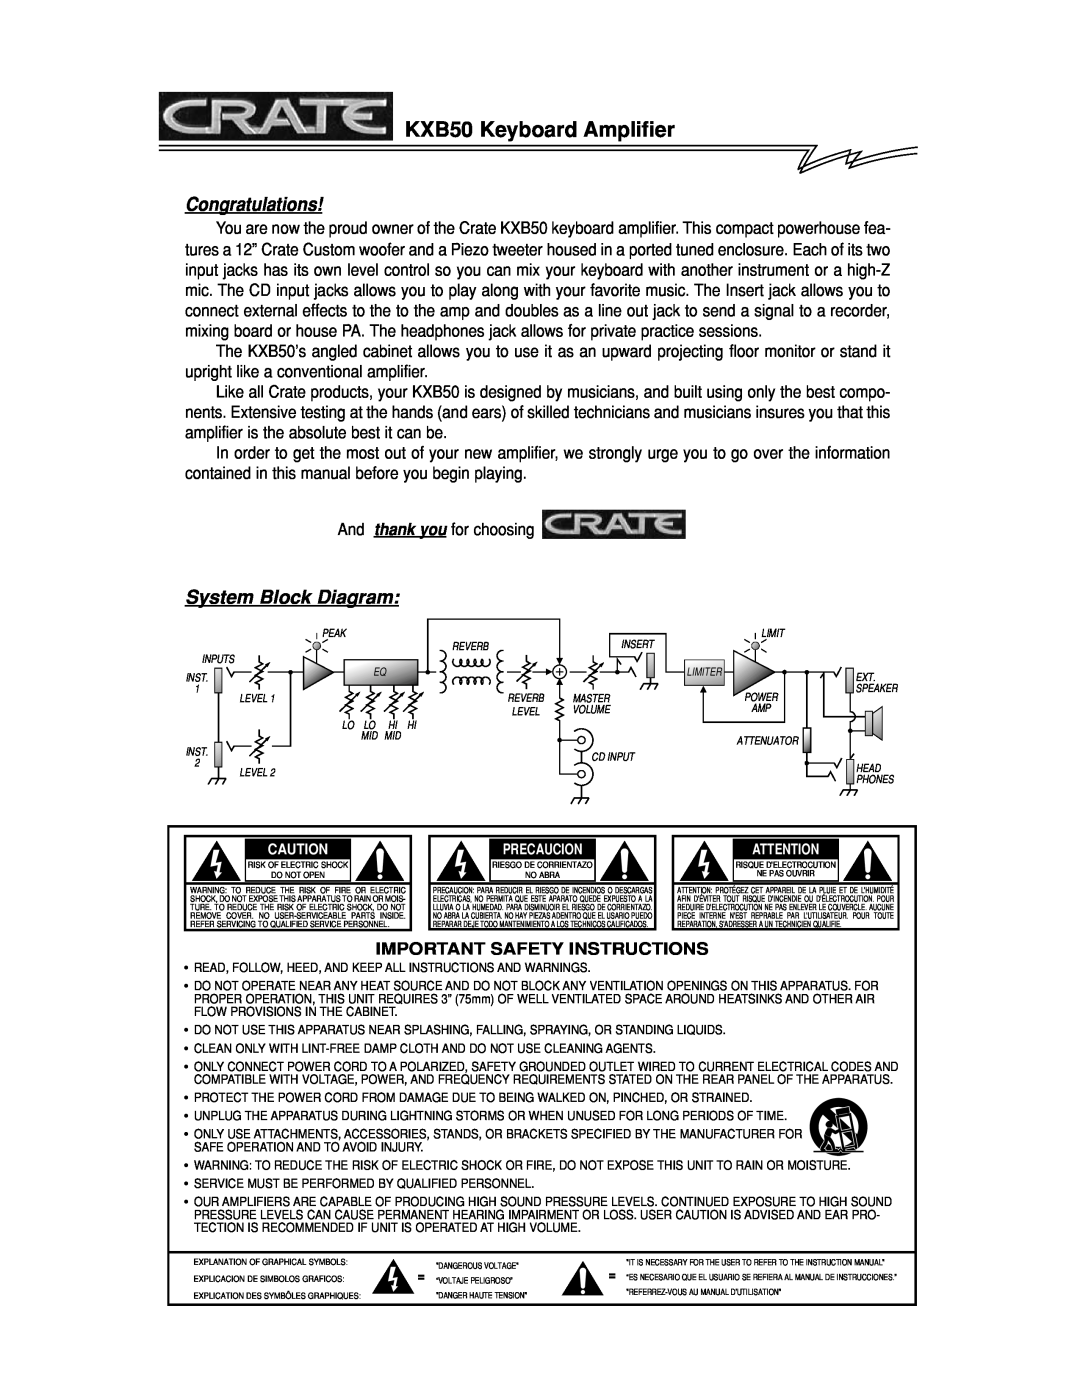 Crate Amplifiers manual KXB50 Keyboard Amplifier, Congratulations, System Block Diagram, Important Safety Instructions 